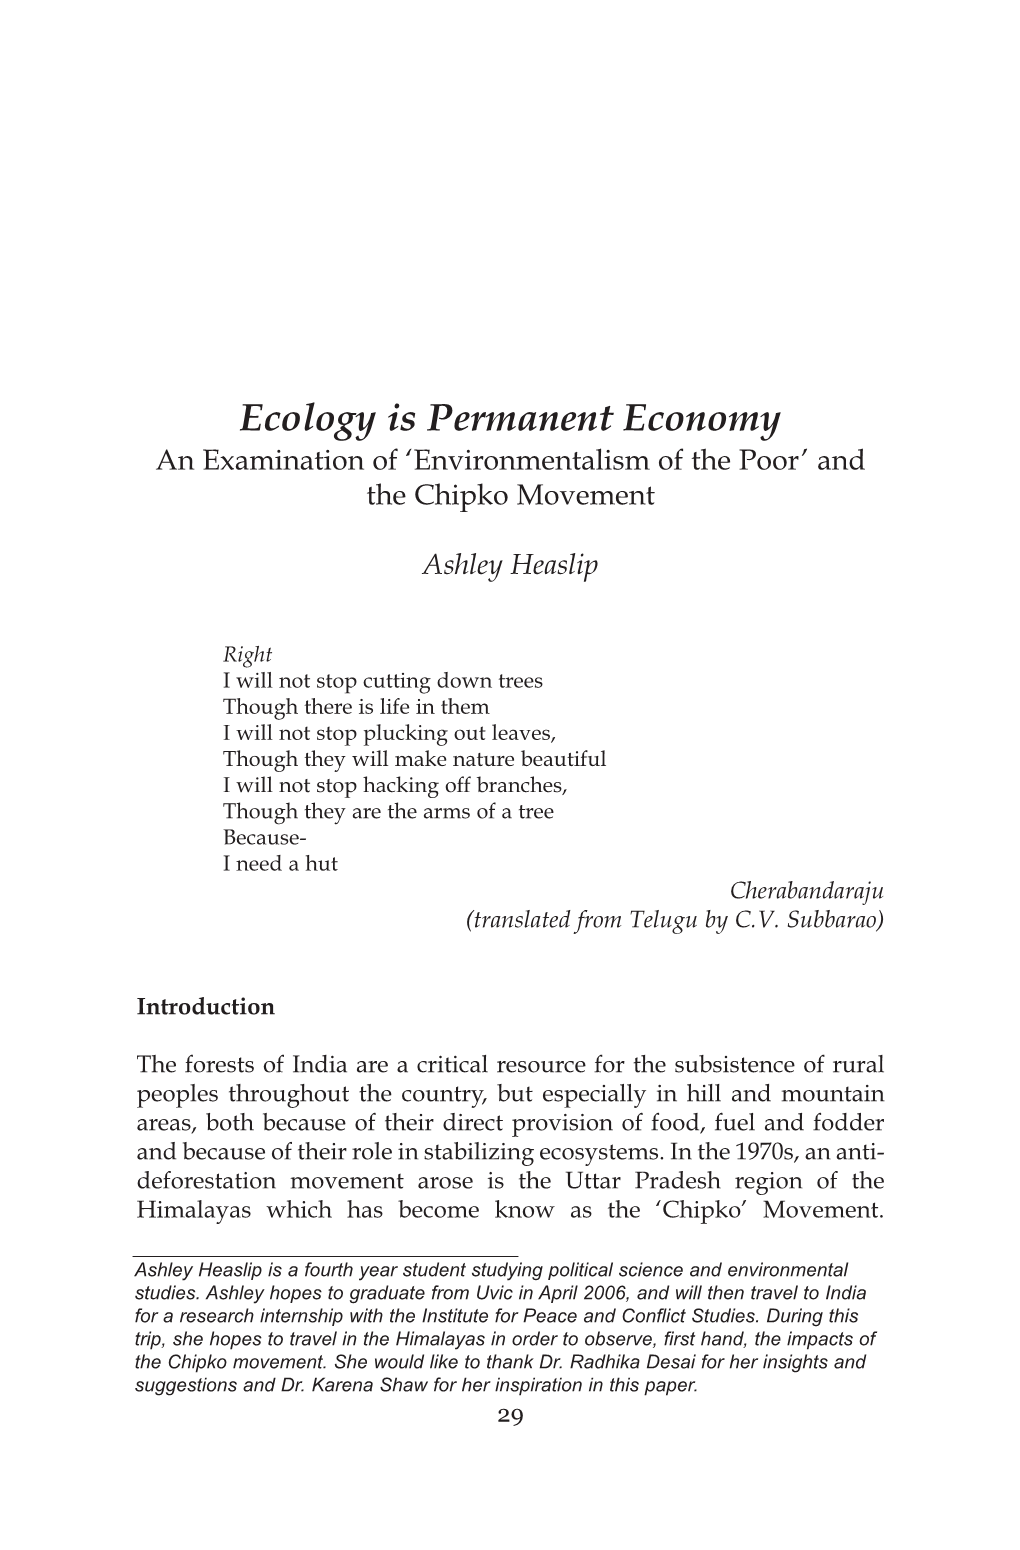 Ecology Is Permanent Economy an Examination of ‘Environmentalism of the Poor’ and the Chipko Movement